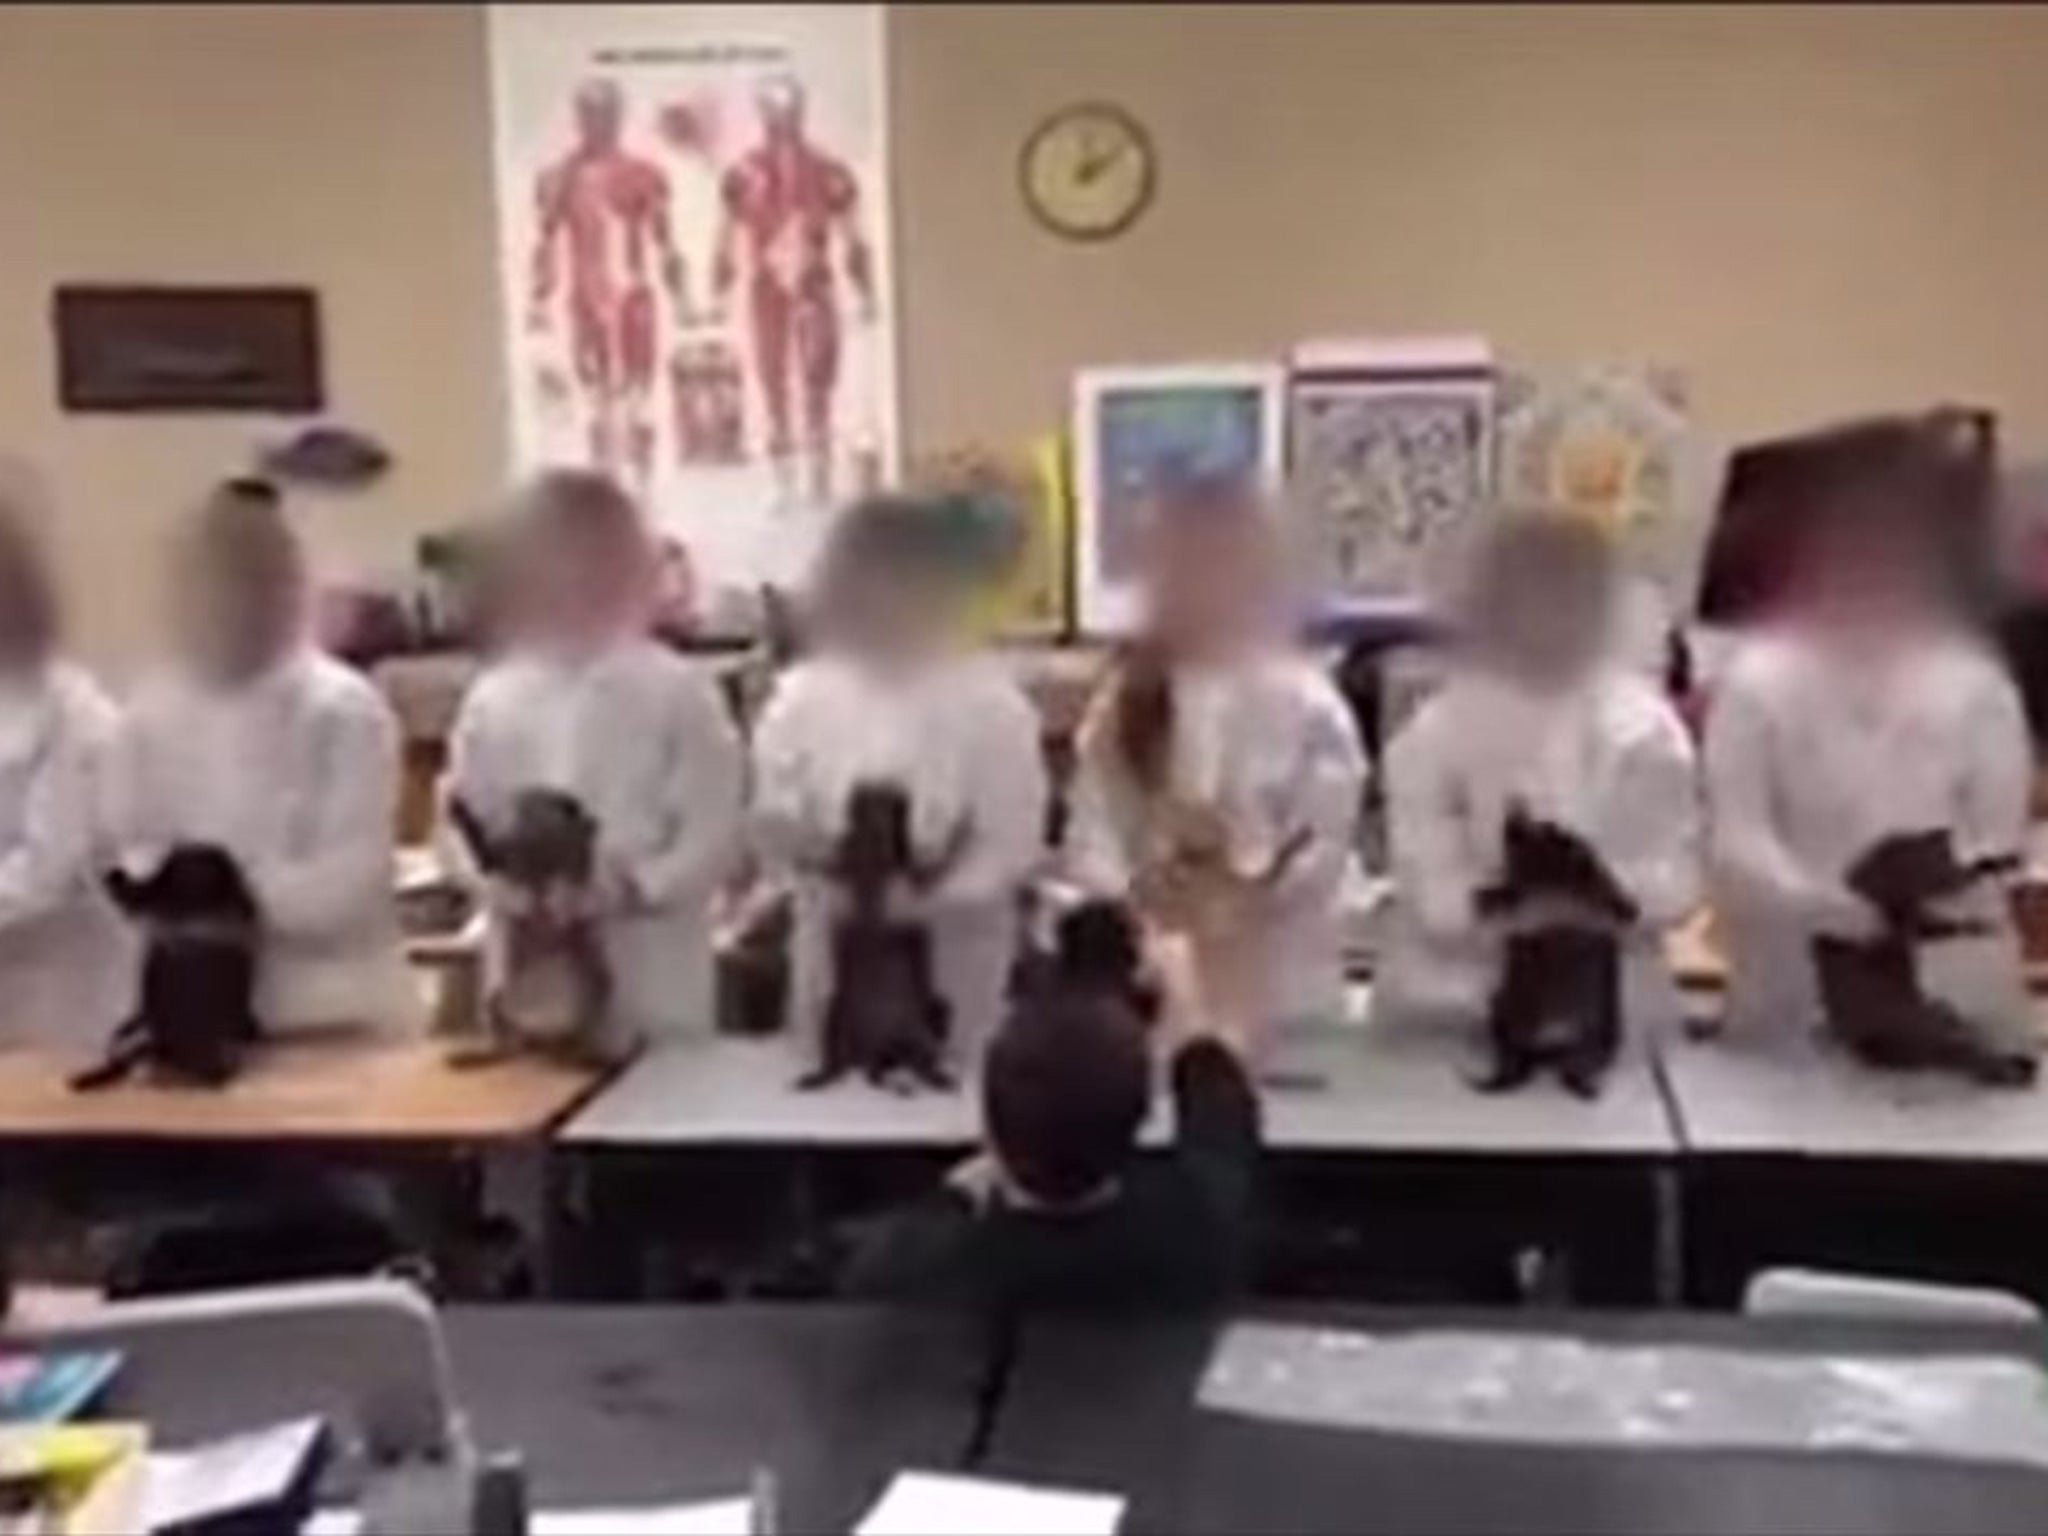 Students can be seen making the dead cats 'dance' during a biology lesson involving dissection